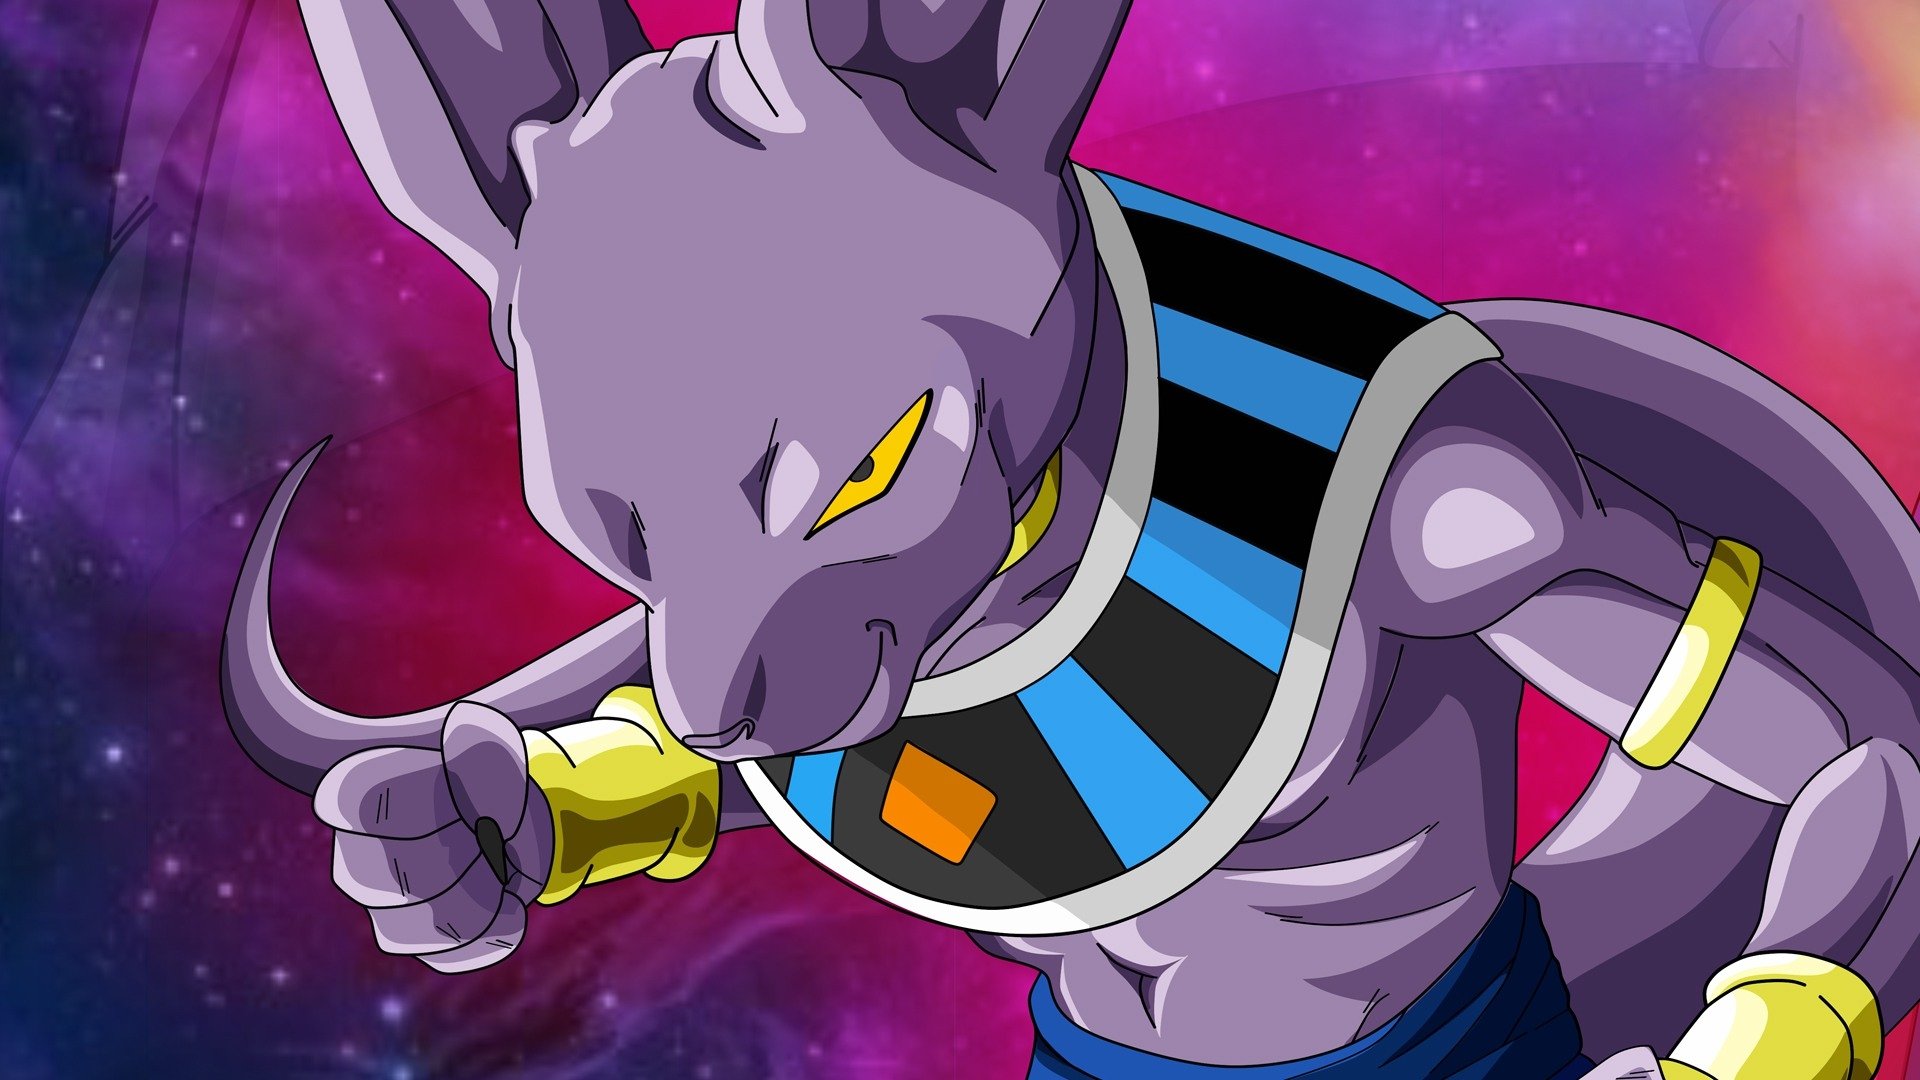 Dragon Ball Super - Beerus HD Wallpaper | Background Image | 1920x1080 | ID:922300 - Wallpaper Abyss